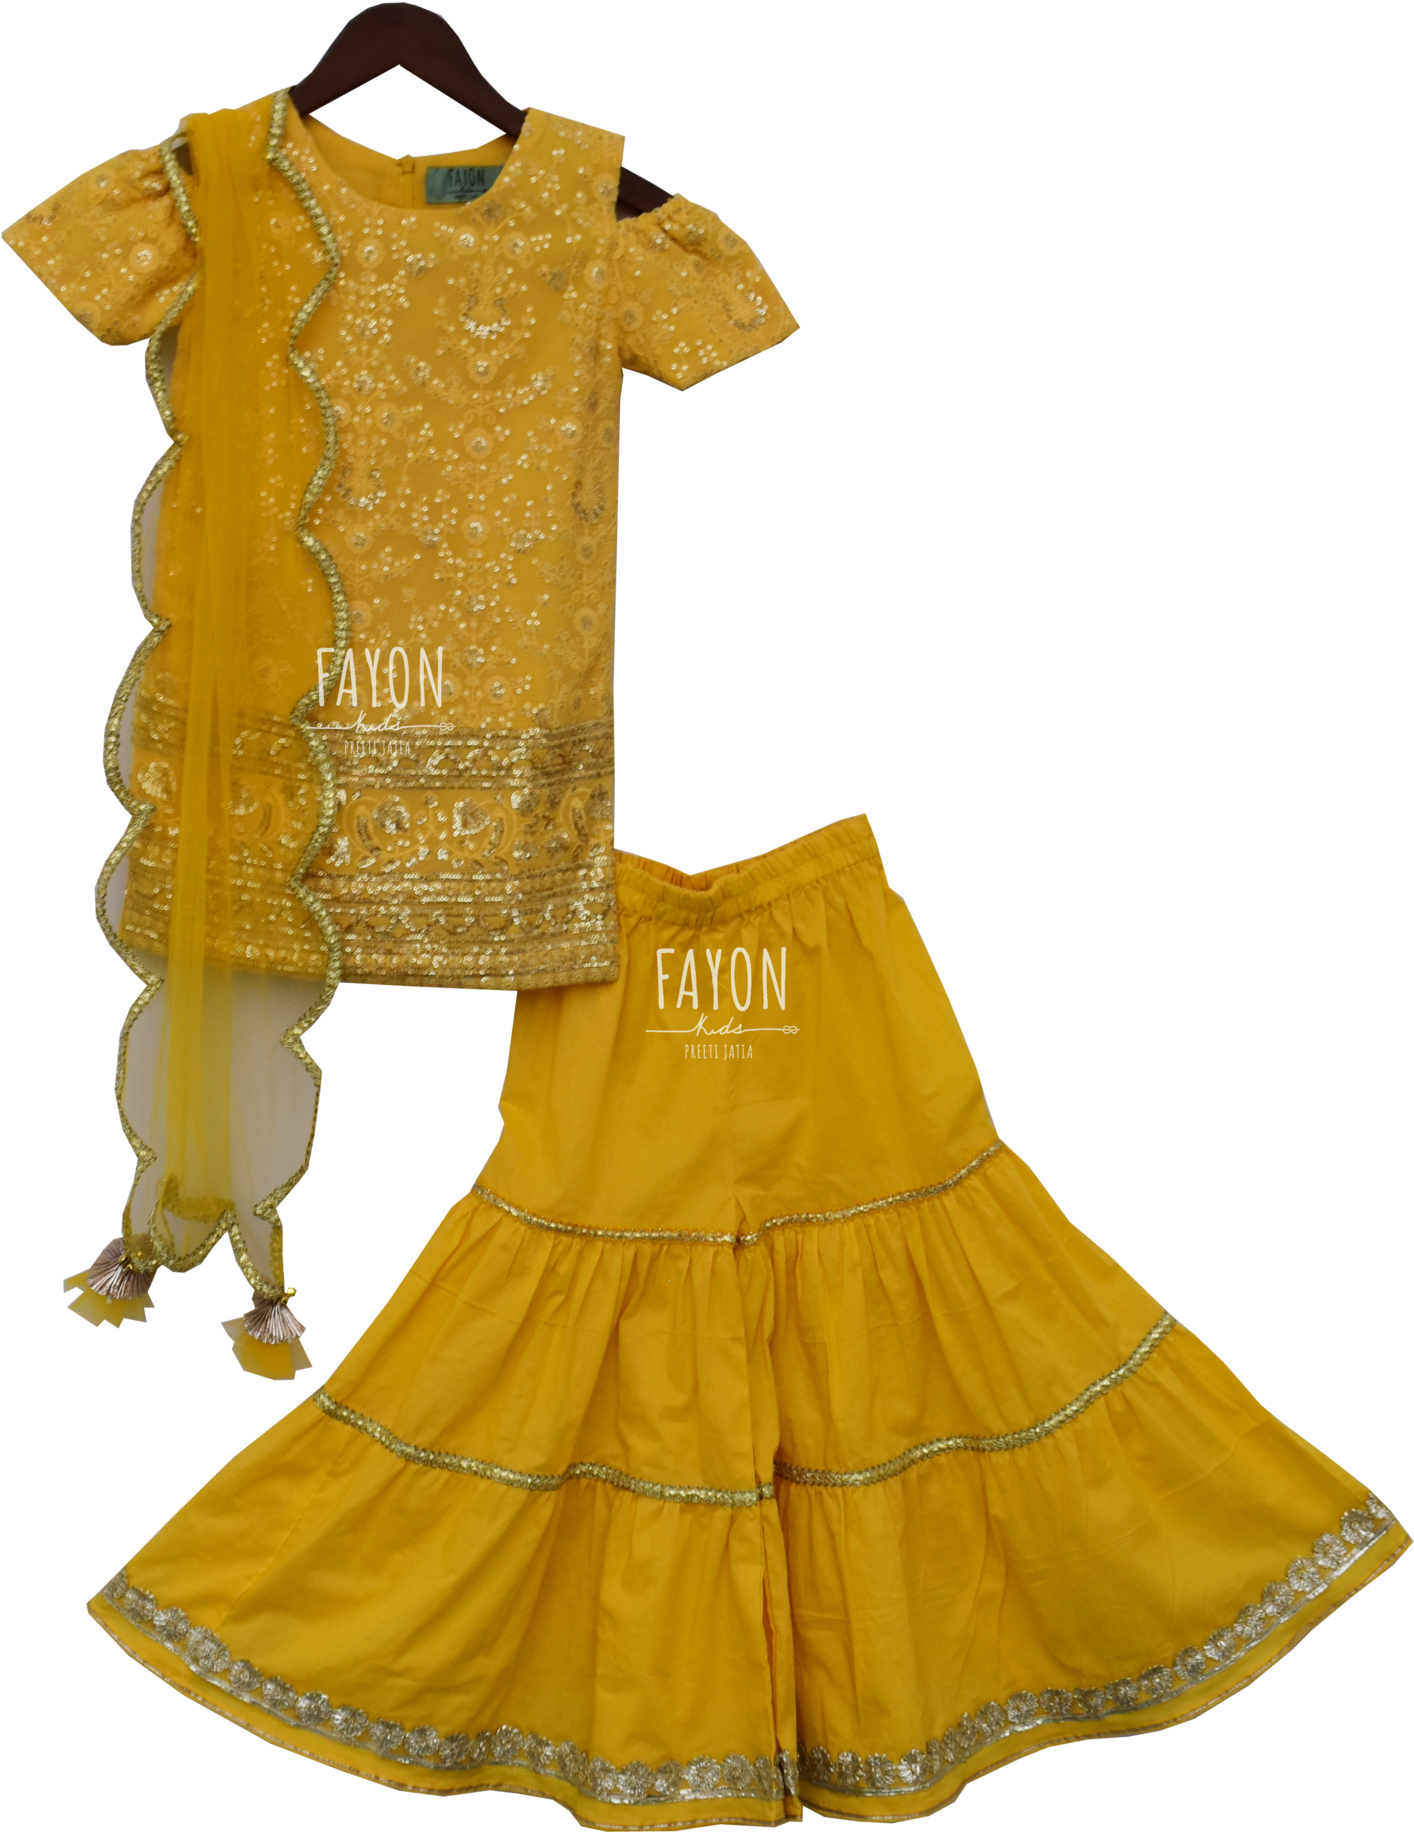 Load Image Into Gallery Viewer, Girls Yellow Cotton - Cotton Sharara Dress (1448x2048), Png Download